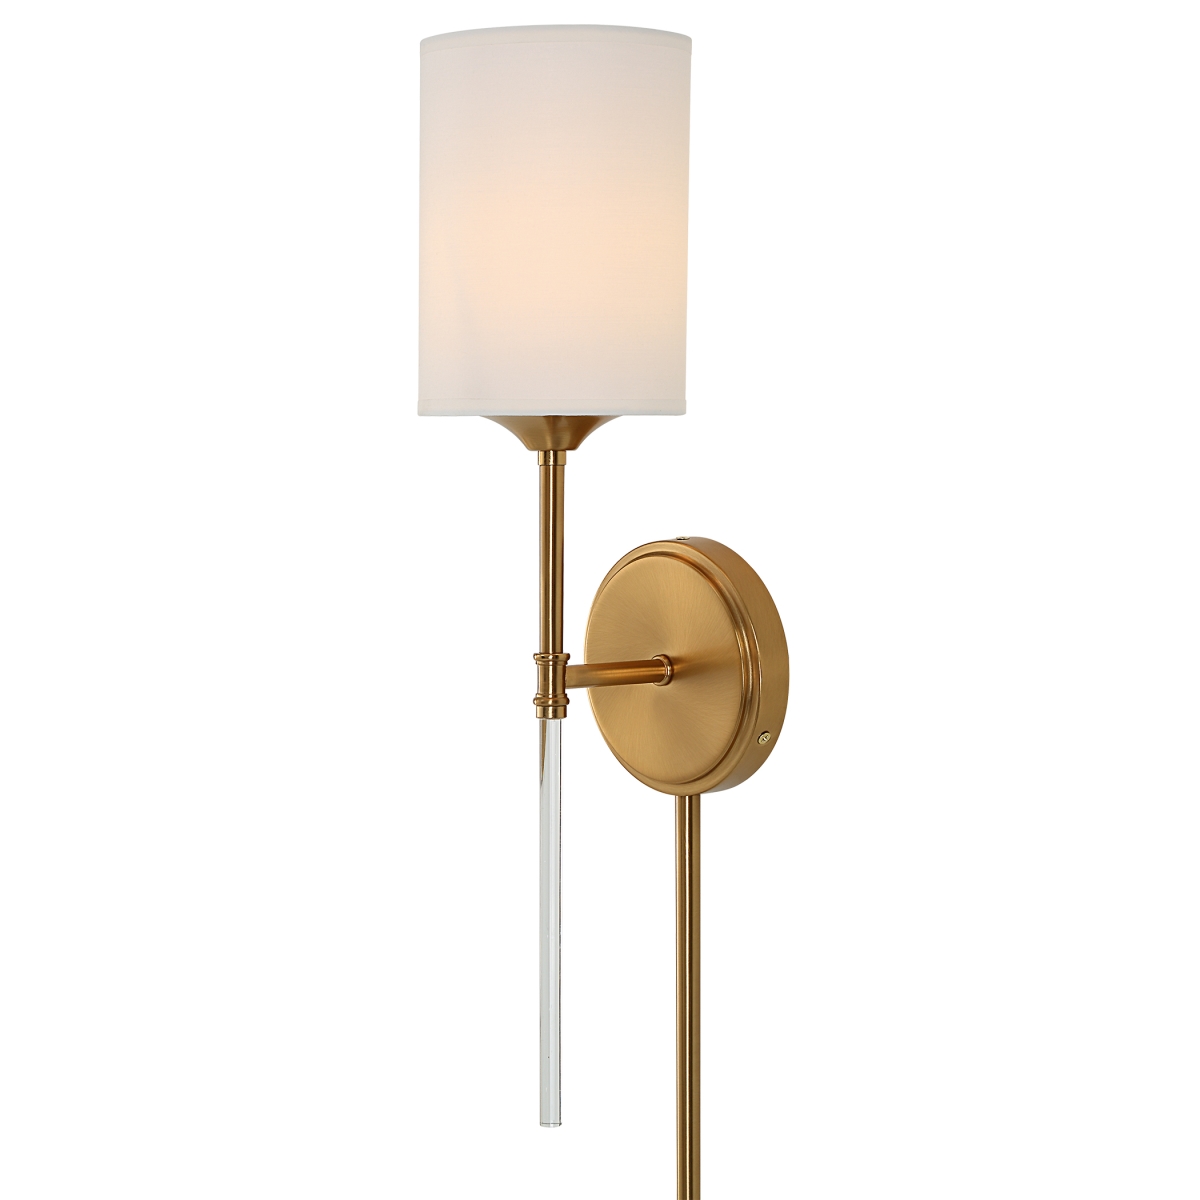 Picture of Uttermost 22579 20 x 6.5 x 5 in. Awyr 1 Light Brass Sconce